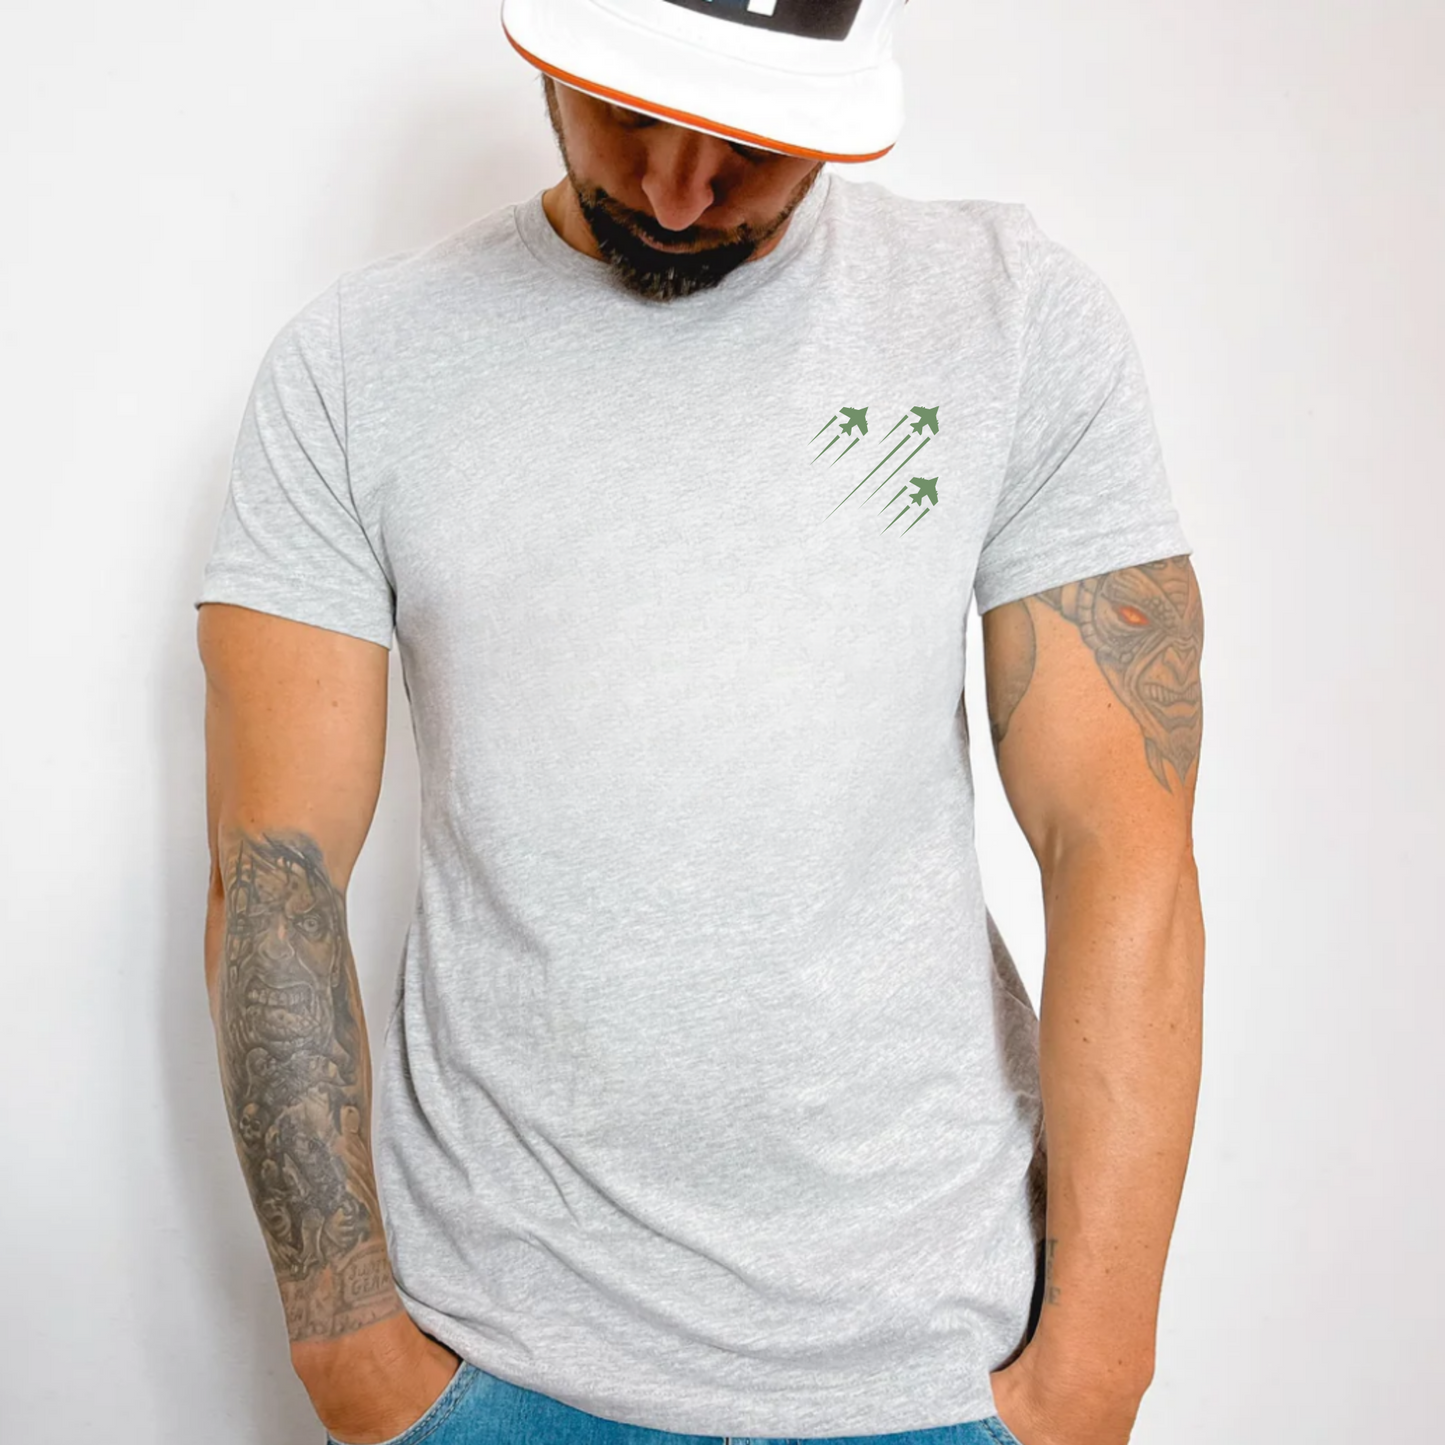 (shirt not included) Jets in Green Pocket - Matte Clear Film Transfer